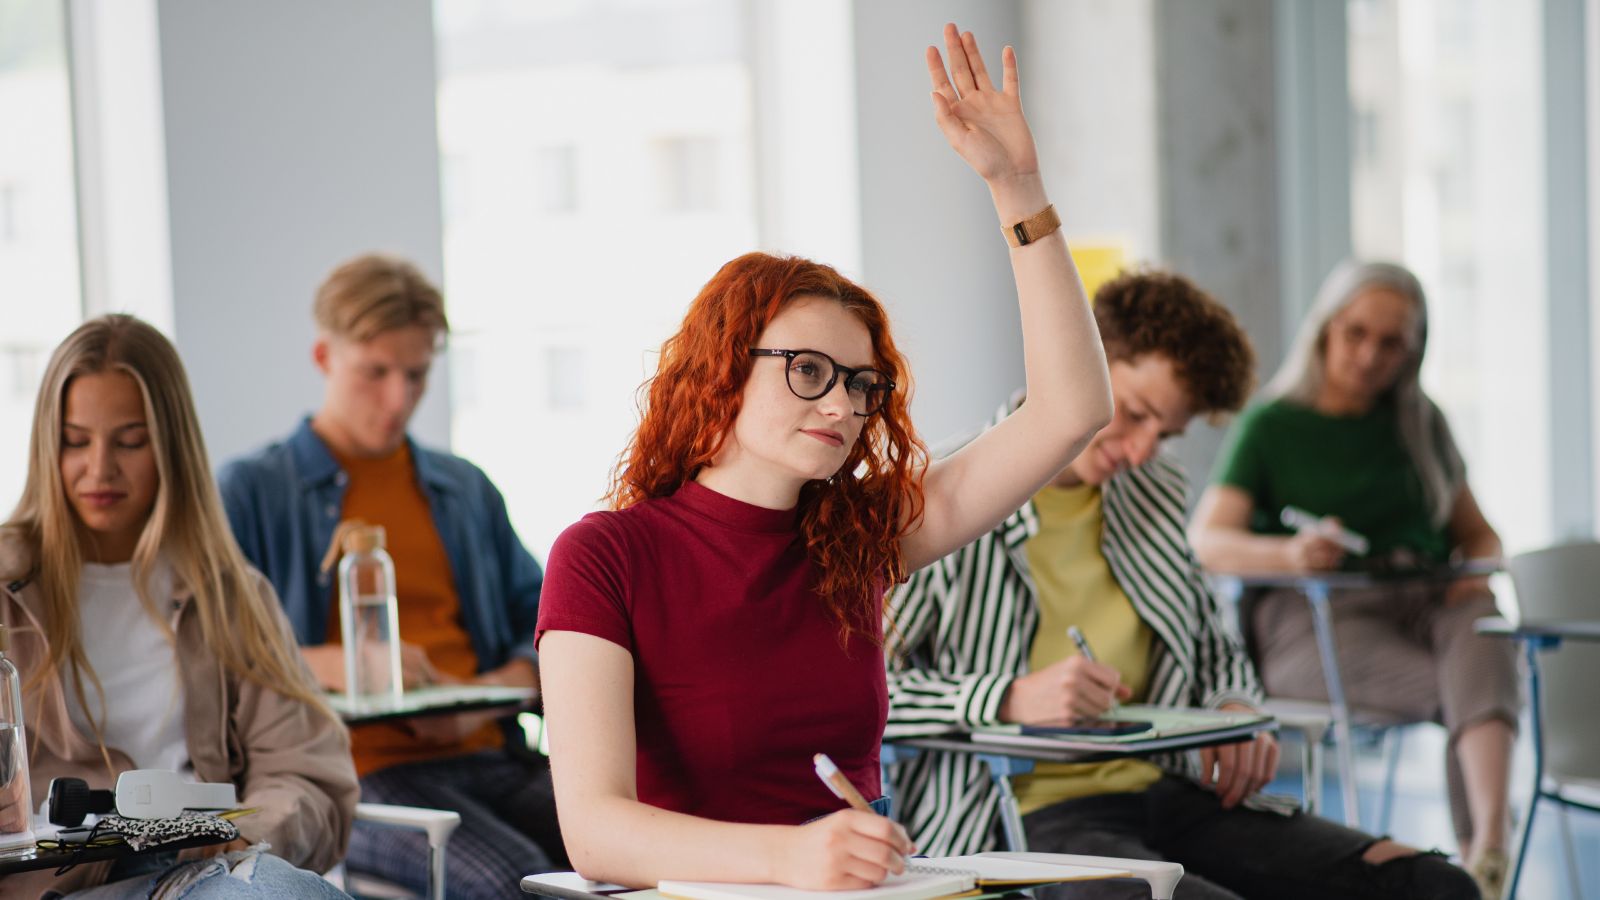 A portrait of a group of university students sitting in a classroom indoors, studying. One has her hand raised to ask a question.